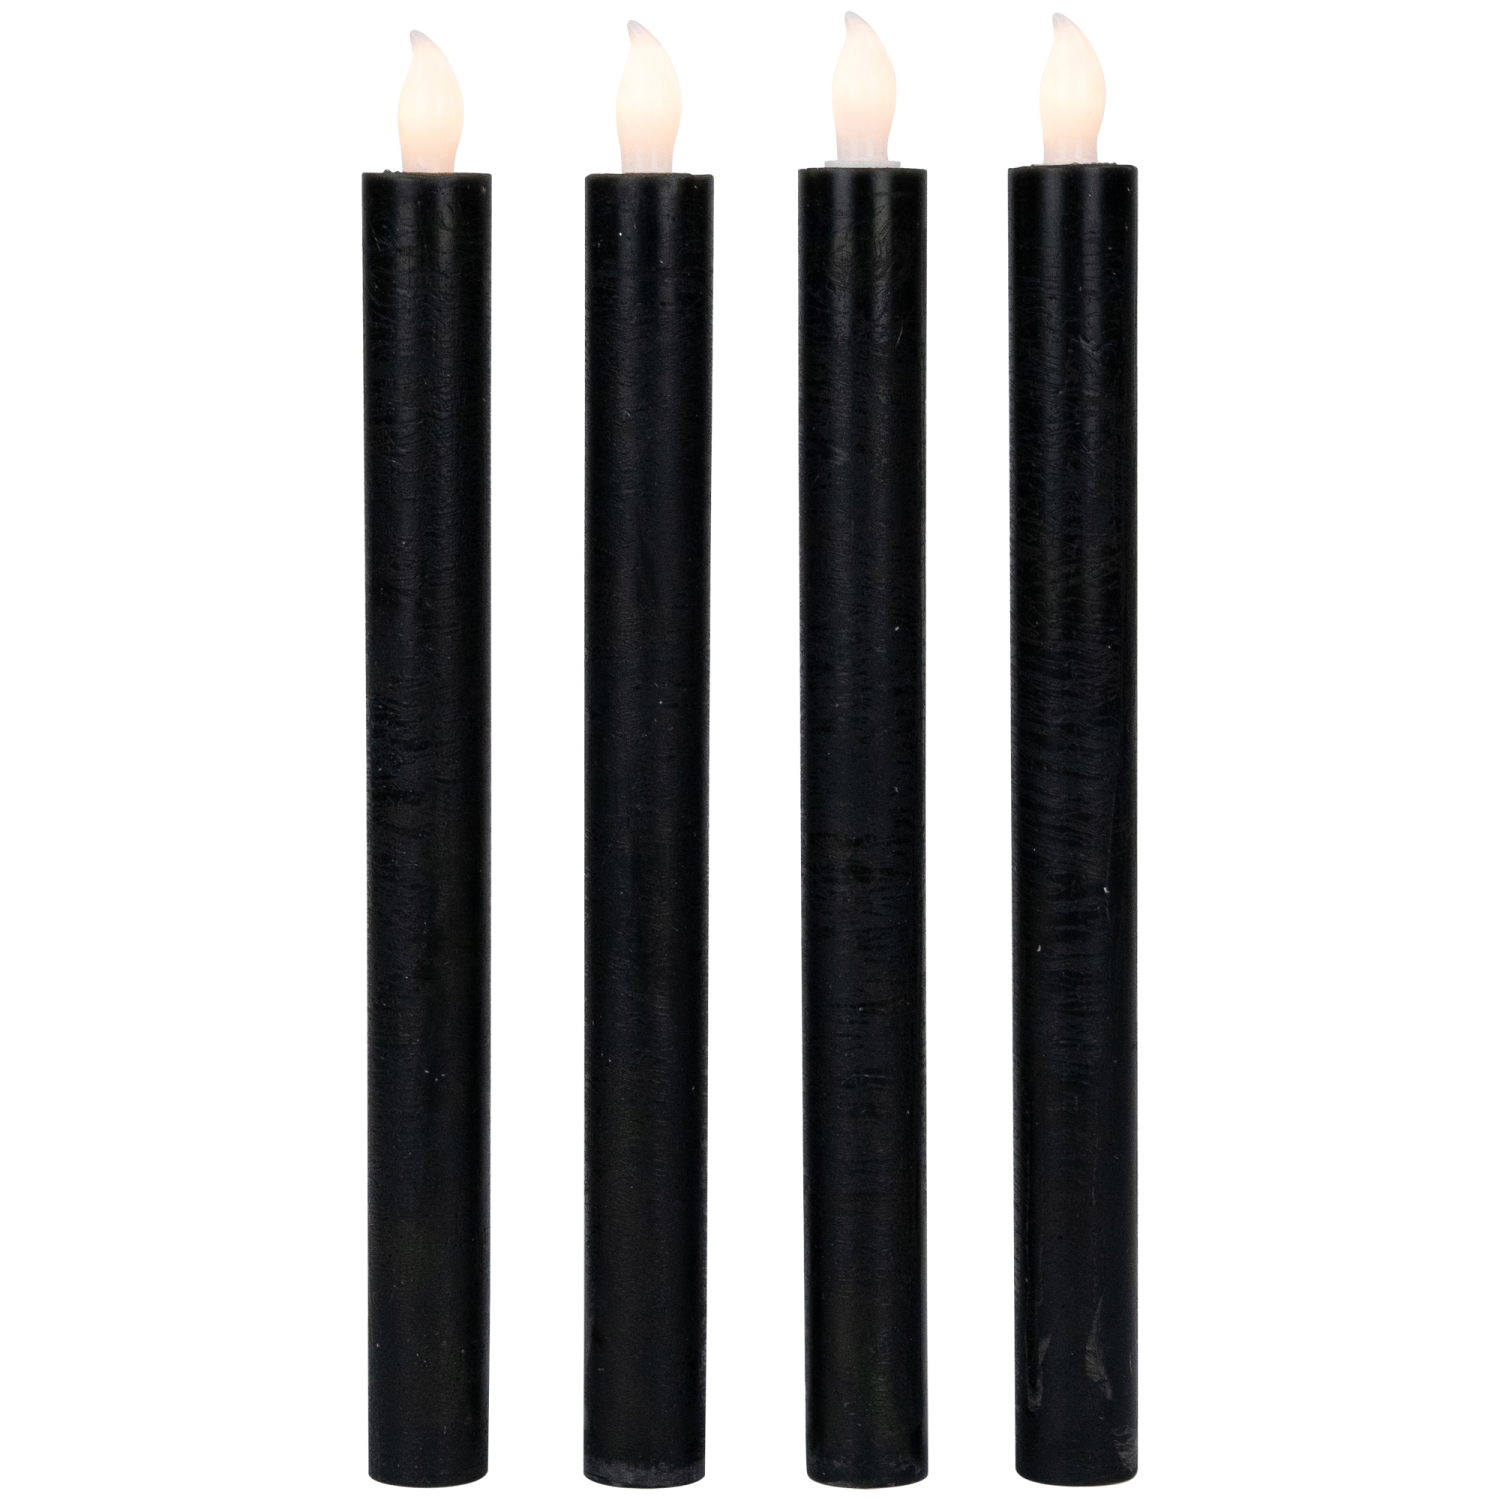 Set of 4 Solid Black LED Flickering Flameless Halloween Taper Candles 9.5"